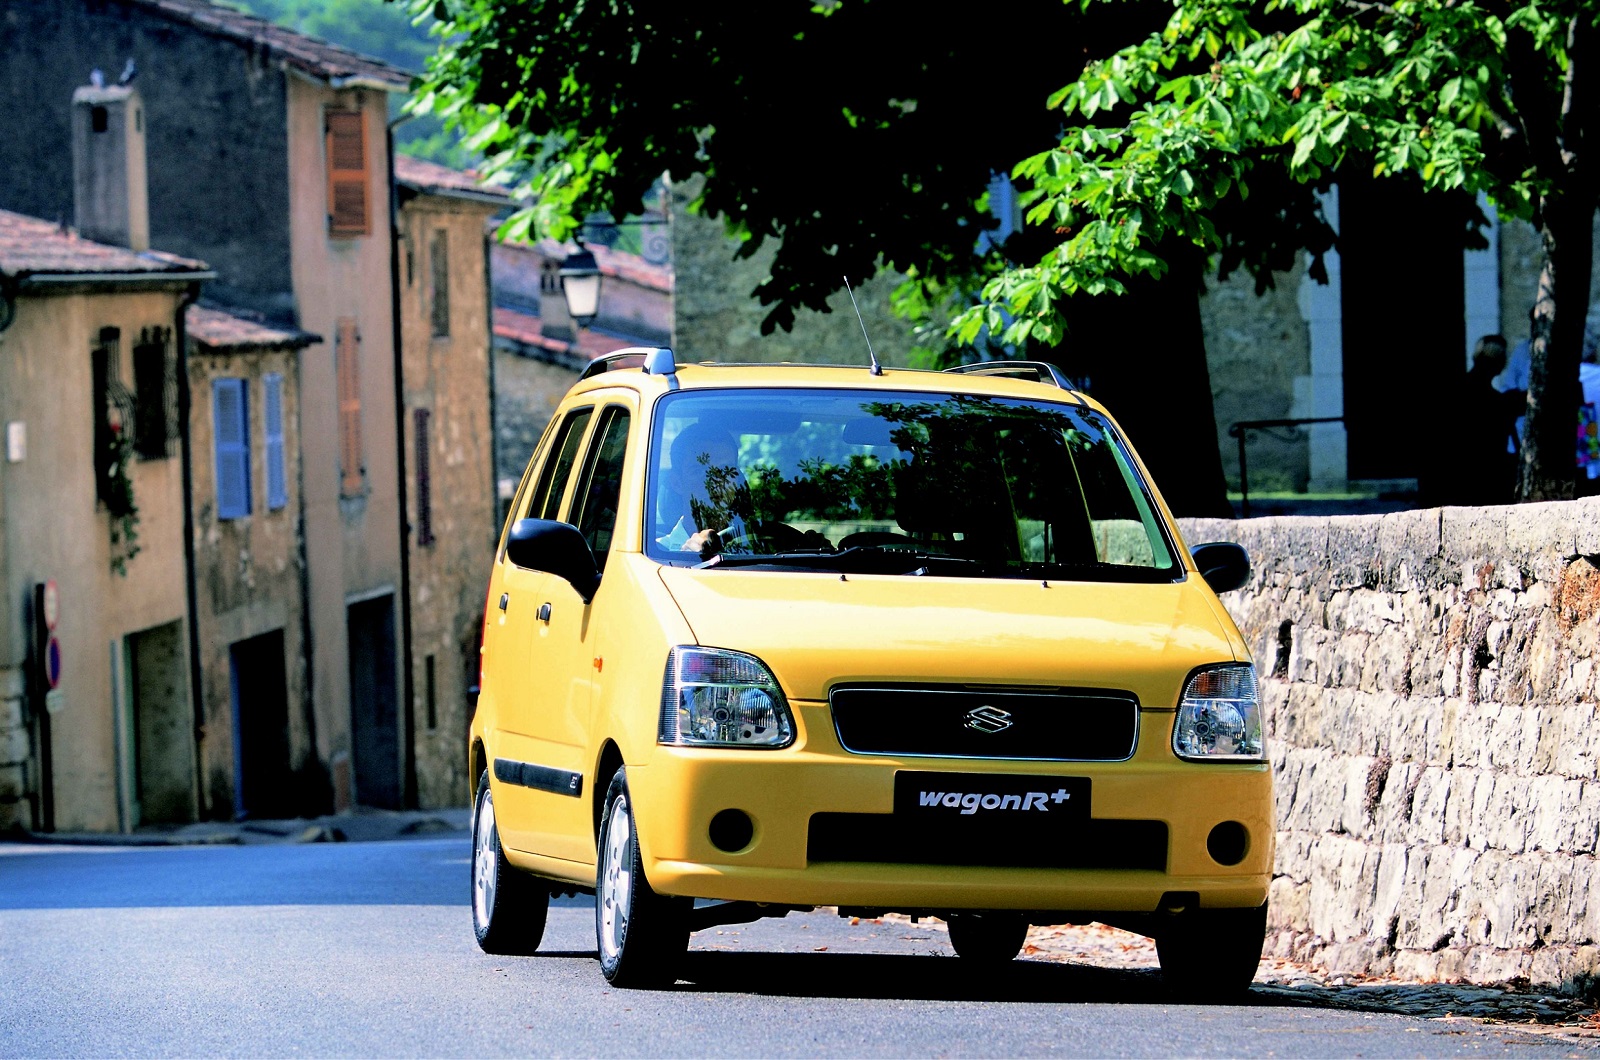 <p>The Suzuki Wagon R has been a regular winner of Japan’s best-selling car during its lifetime and it notched up <strong>3 million sales by 2008</strong>. Much of this success is because it meets its home country’s strict ‘kei’ car rules for size.</p><p>By maximising the cabin space within this restricted footprint, the Wagon R offers room for the family without clogging up city streets. The latest models now come with <strong>hybrid power</strong> to make them even more urban friendly.</p>